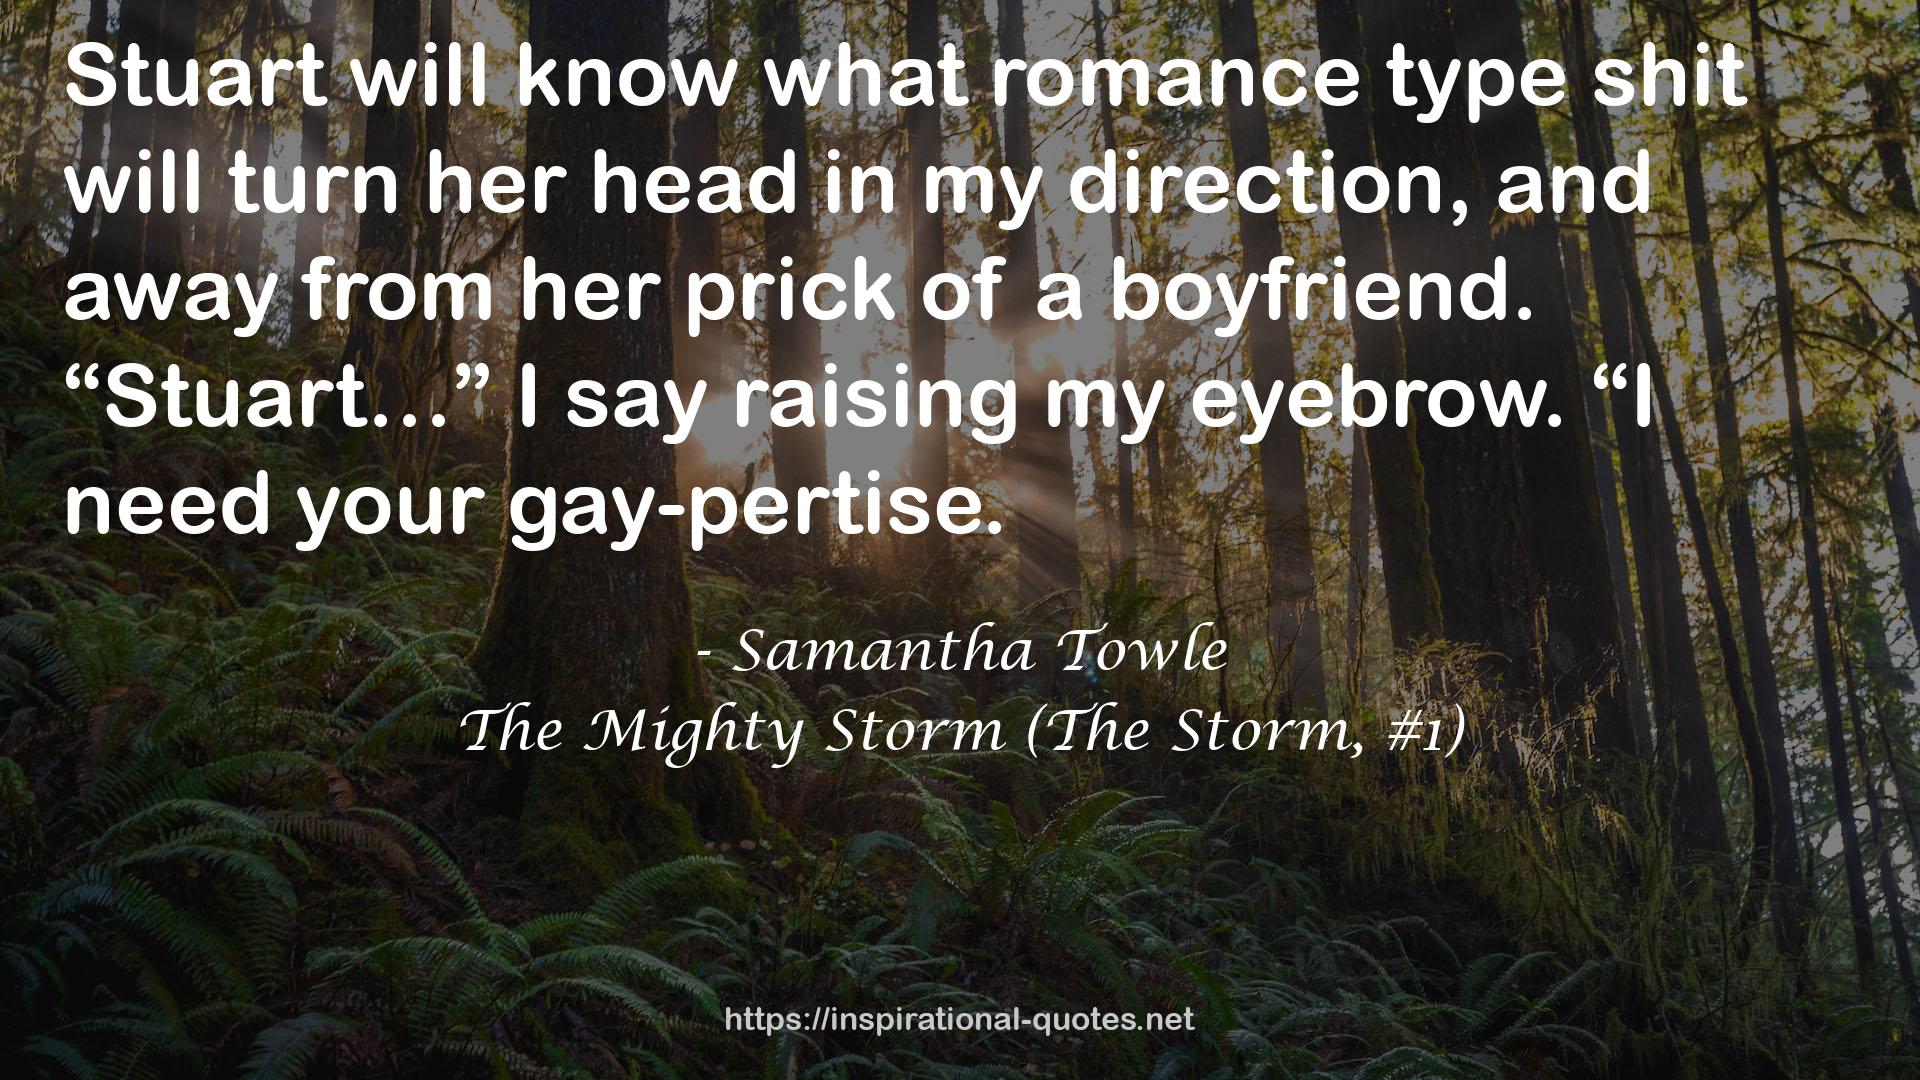 The Mighty Storm (The Storm, #1) QUOTES